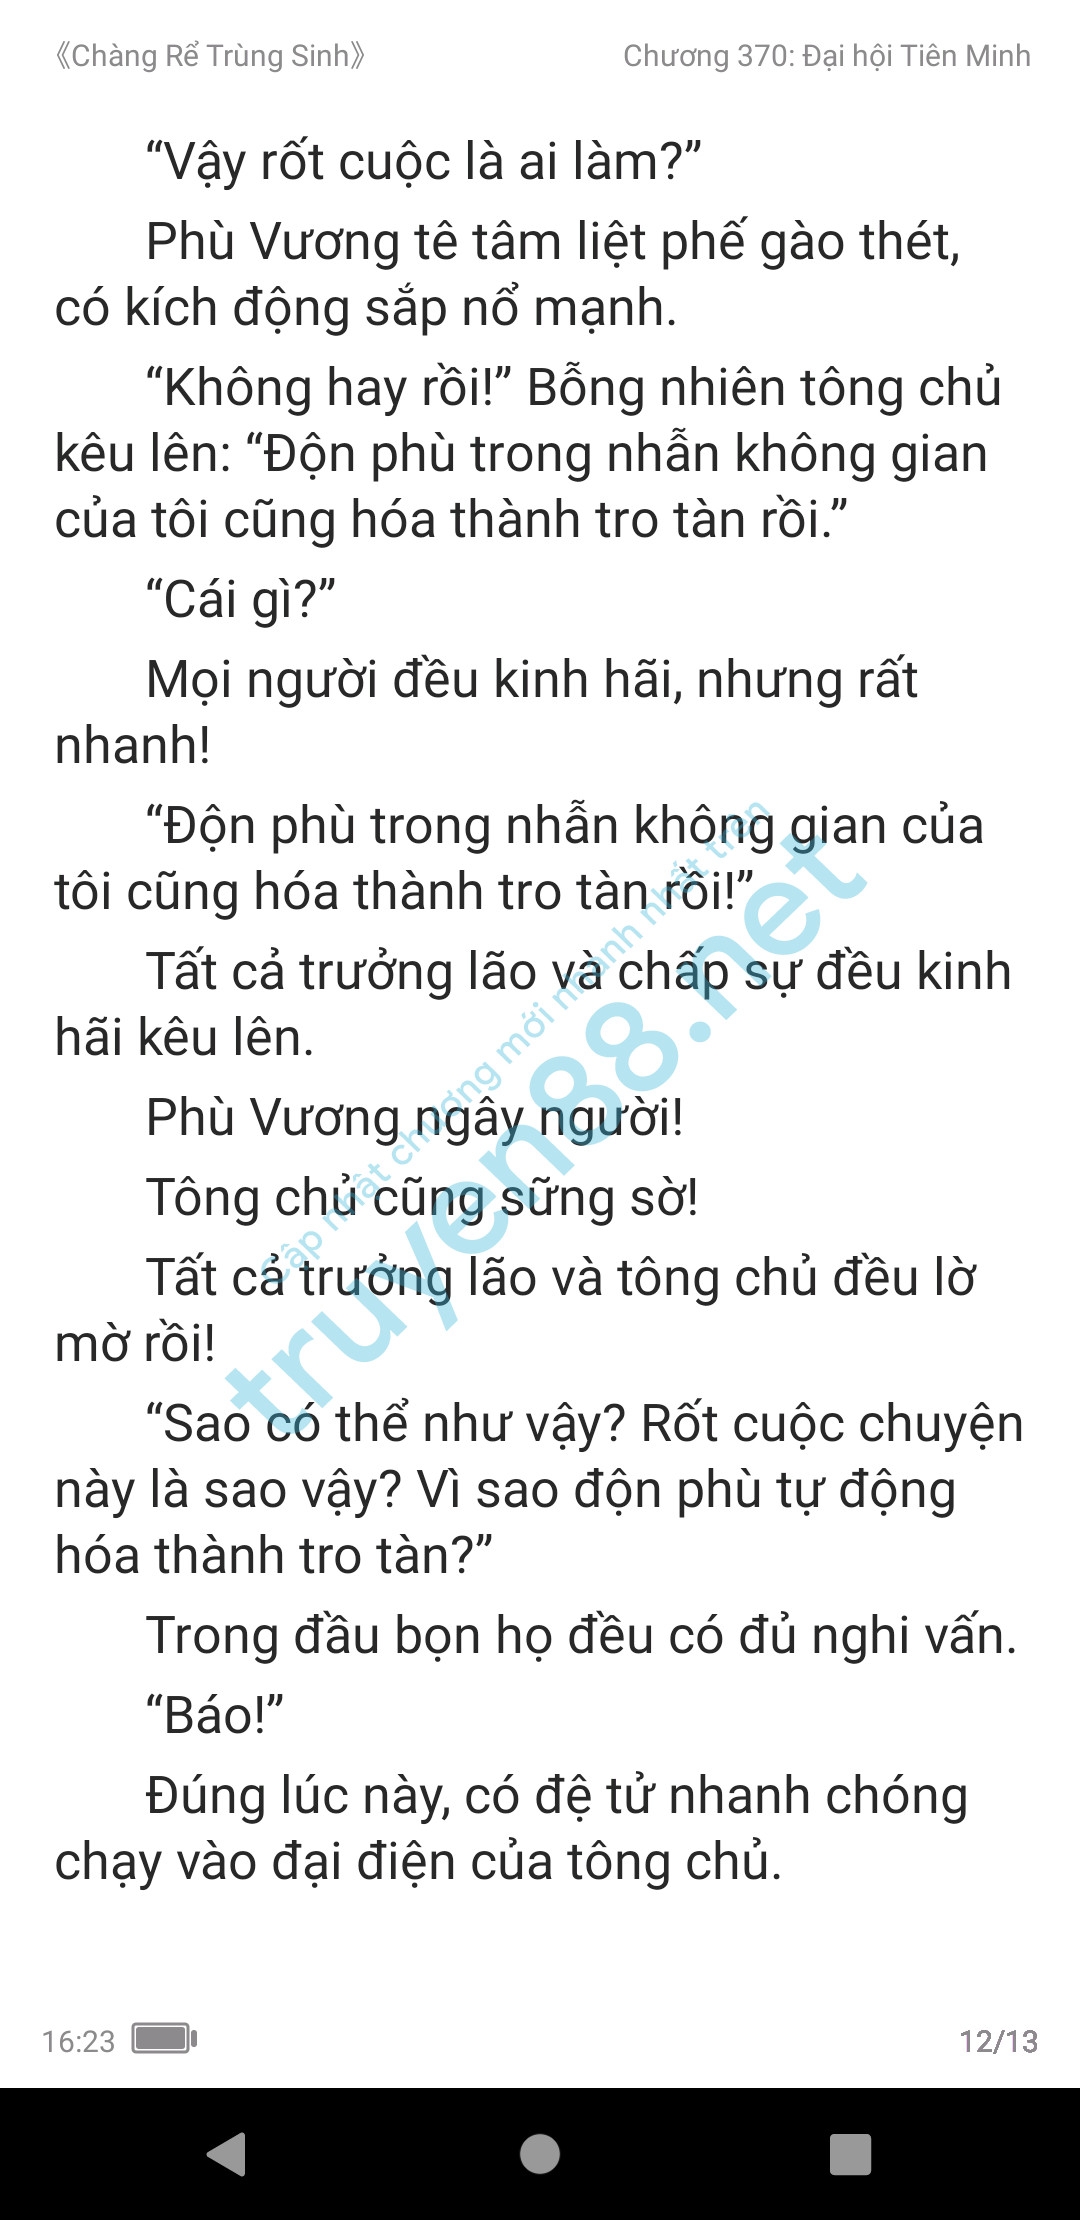 chang-re-trung-sinh-370-0